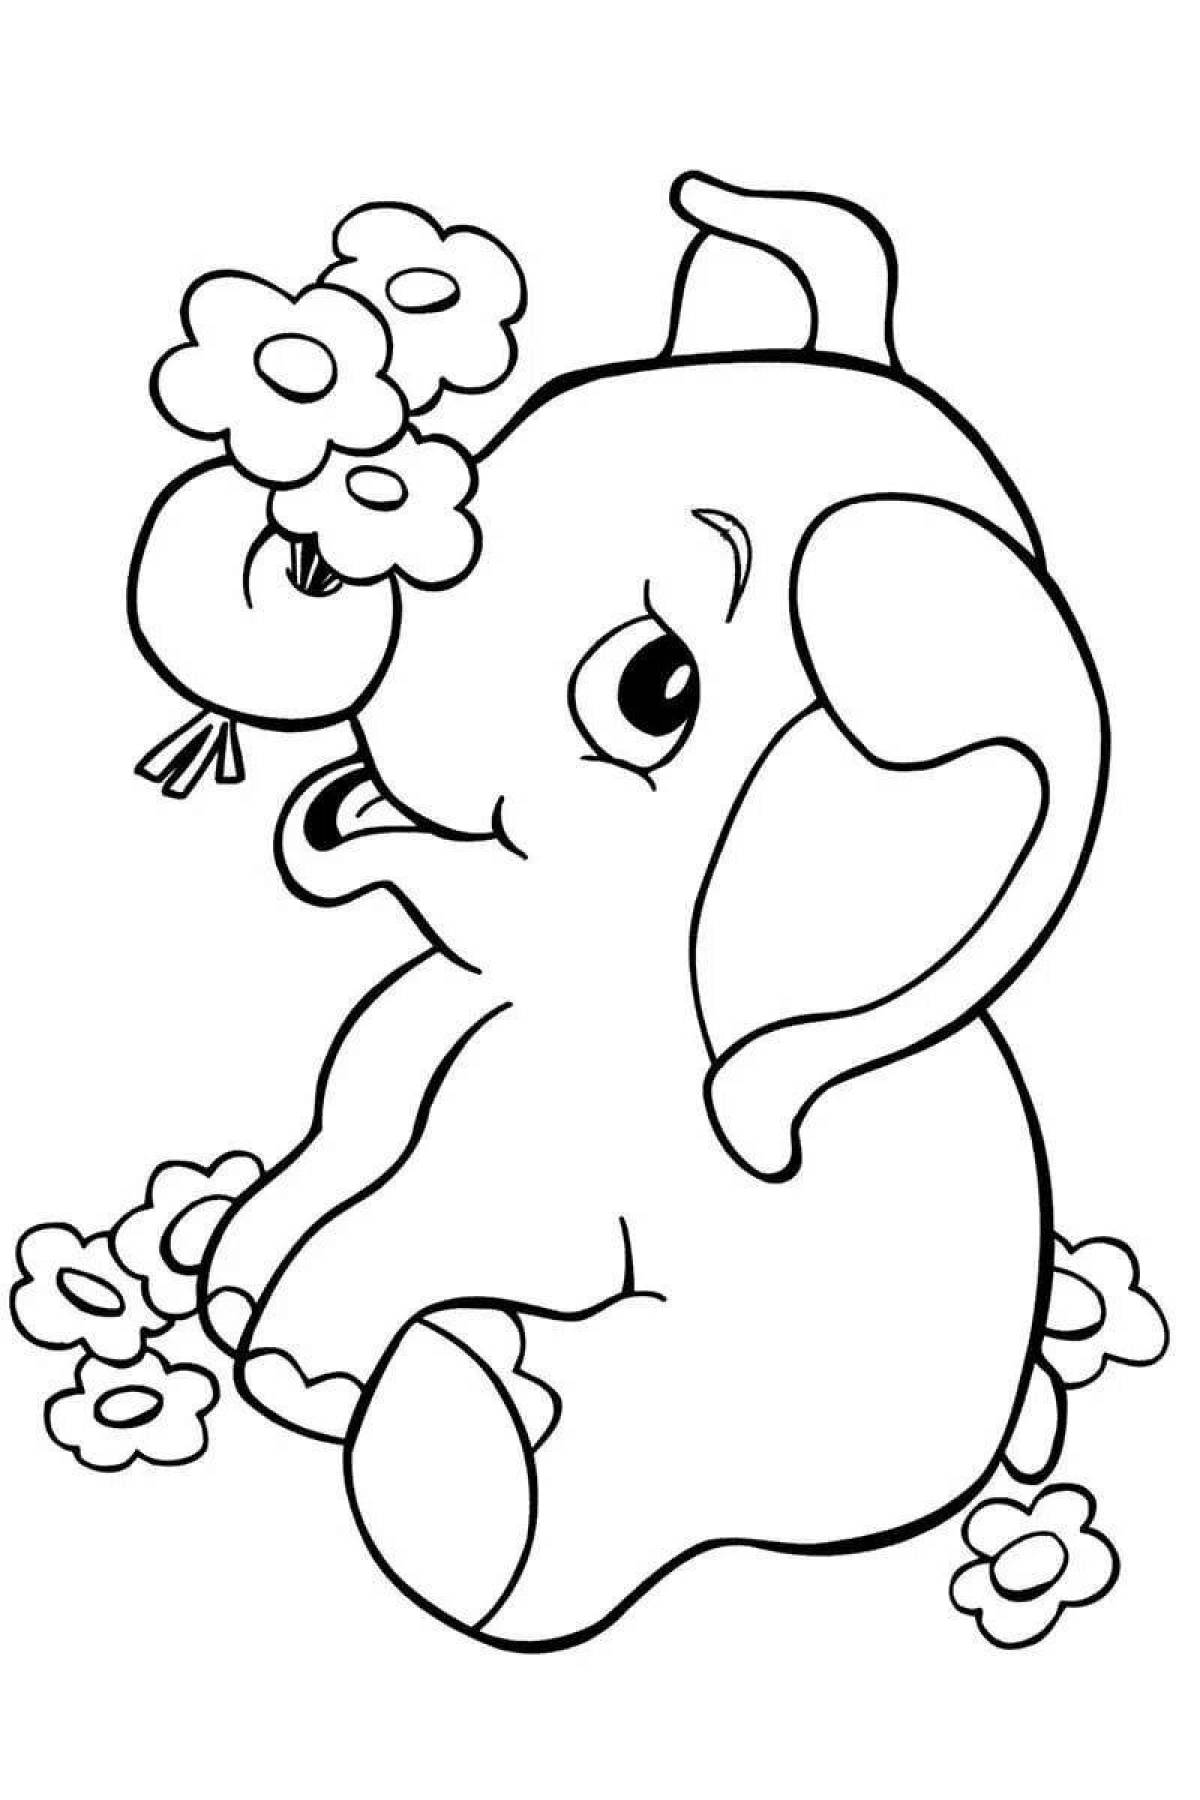 Amazing animal coloring pages for kids